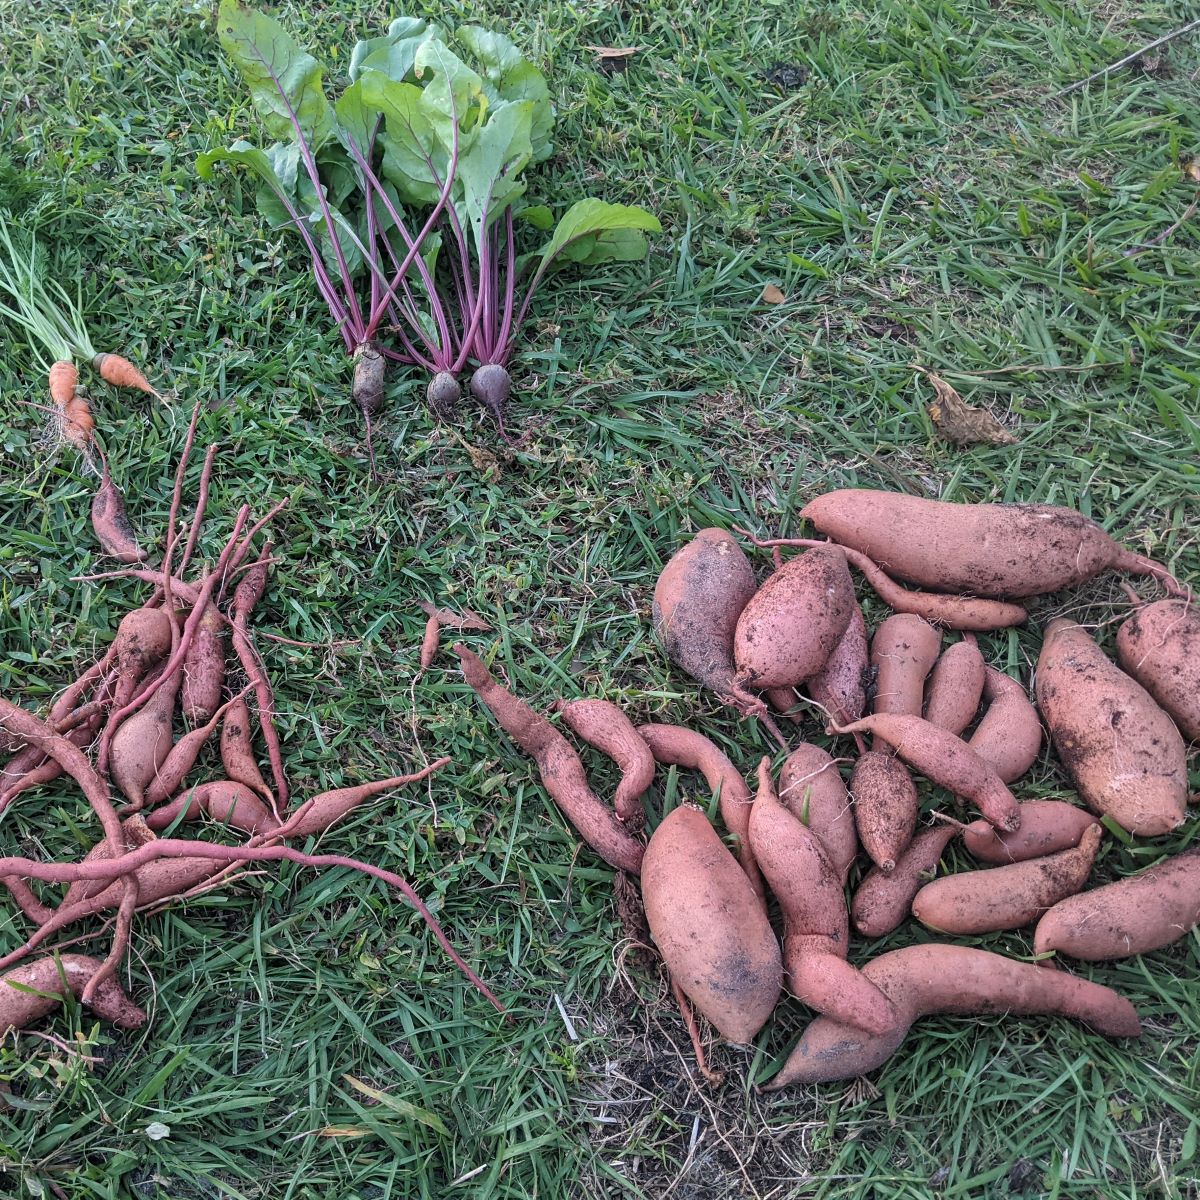 When to harvest sweet potatoes